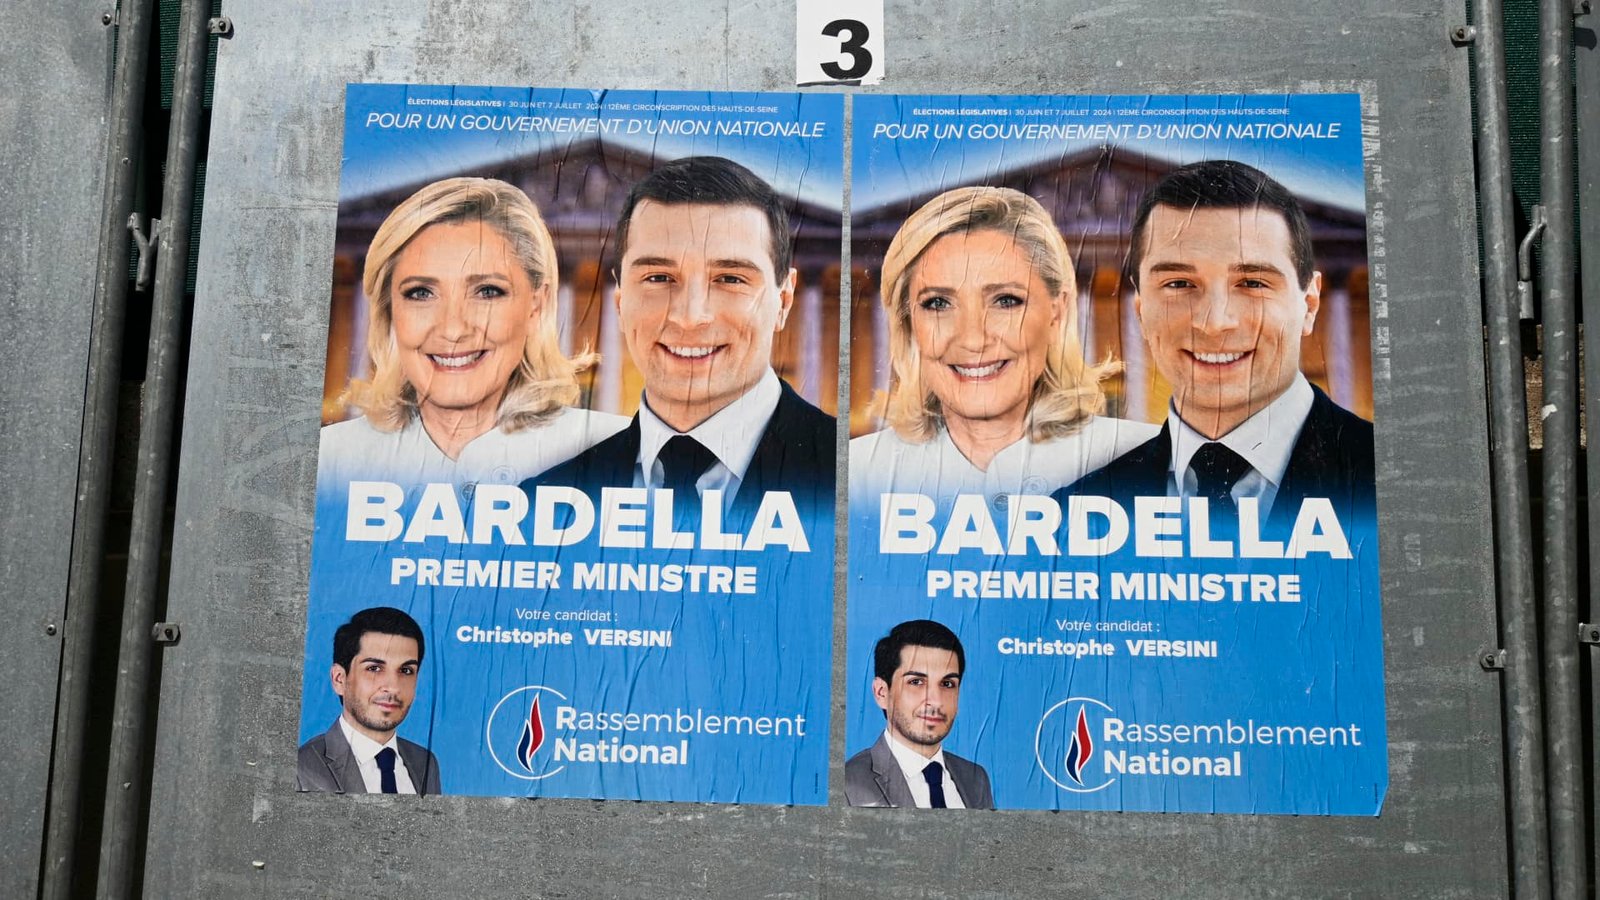 France's shock election has rattled nerves and raised debt crisis talk